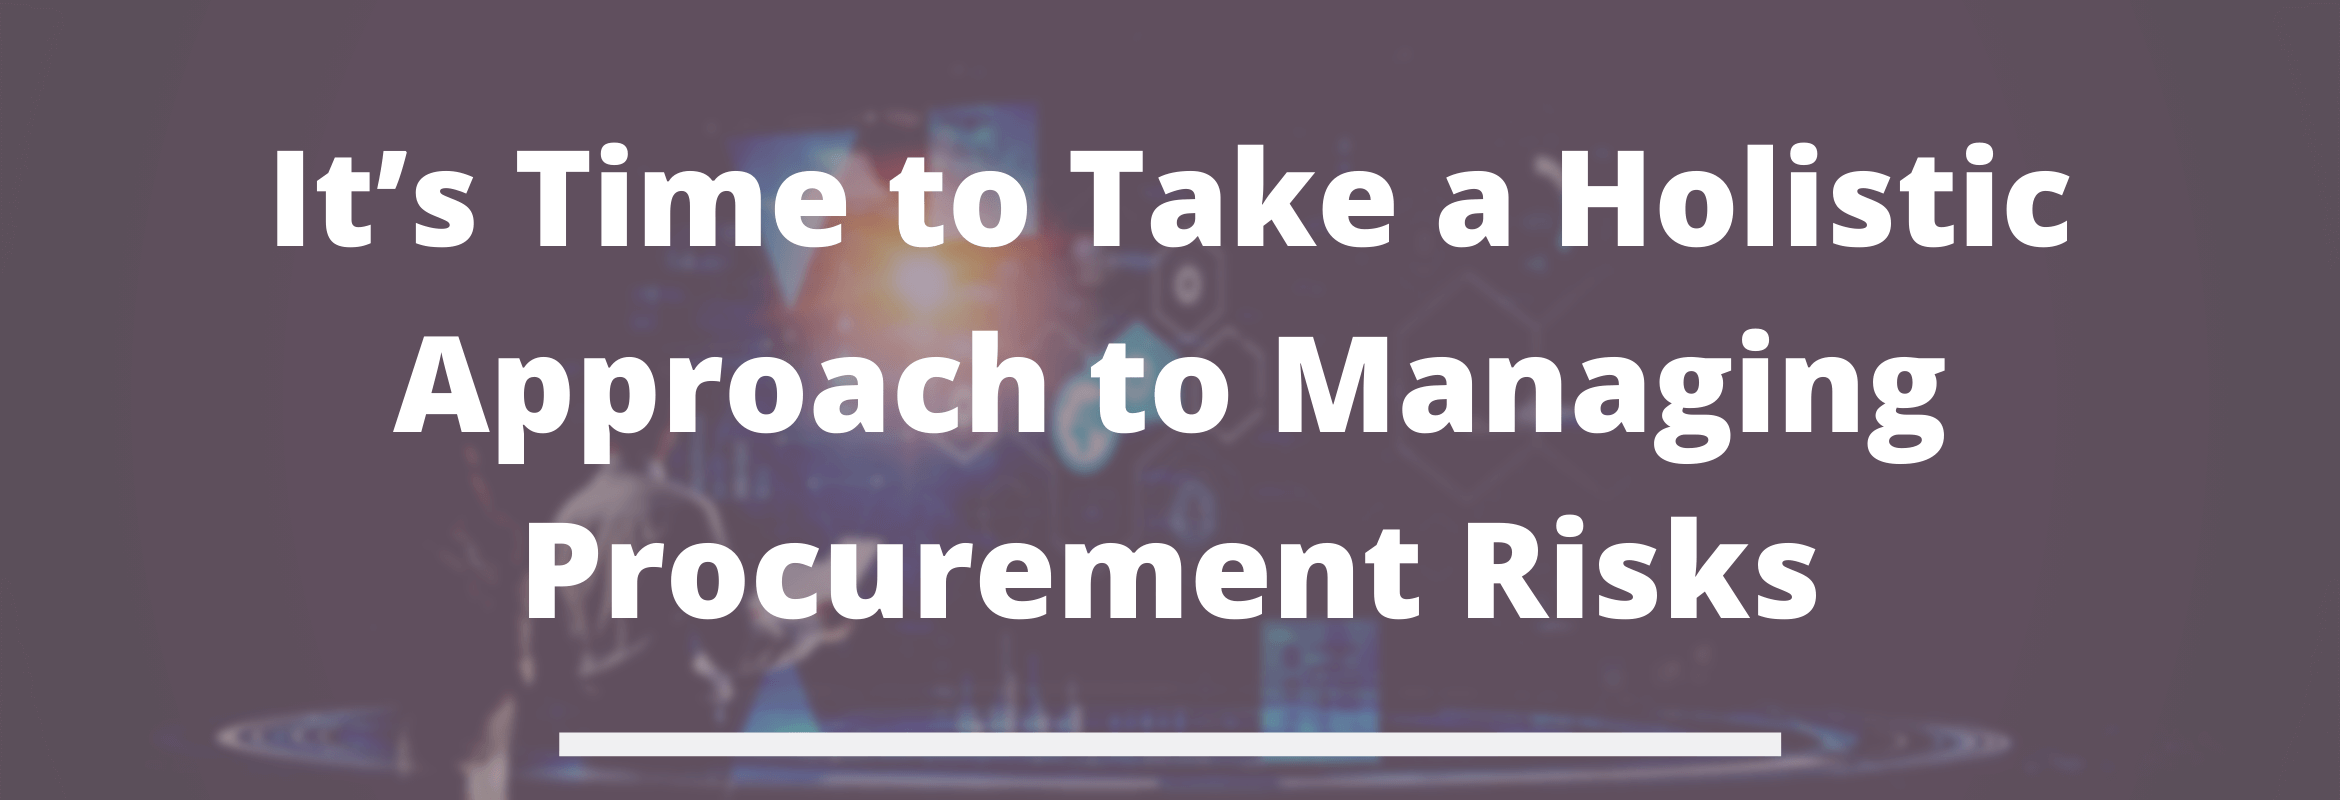 Holistic Approach to Managing Procurement 